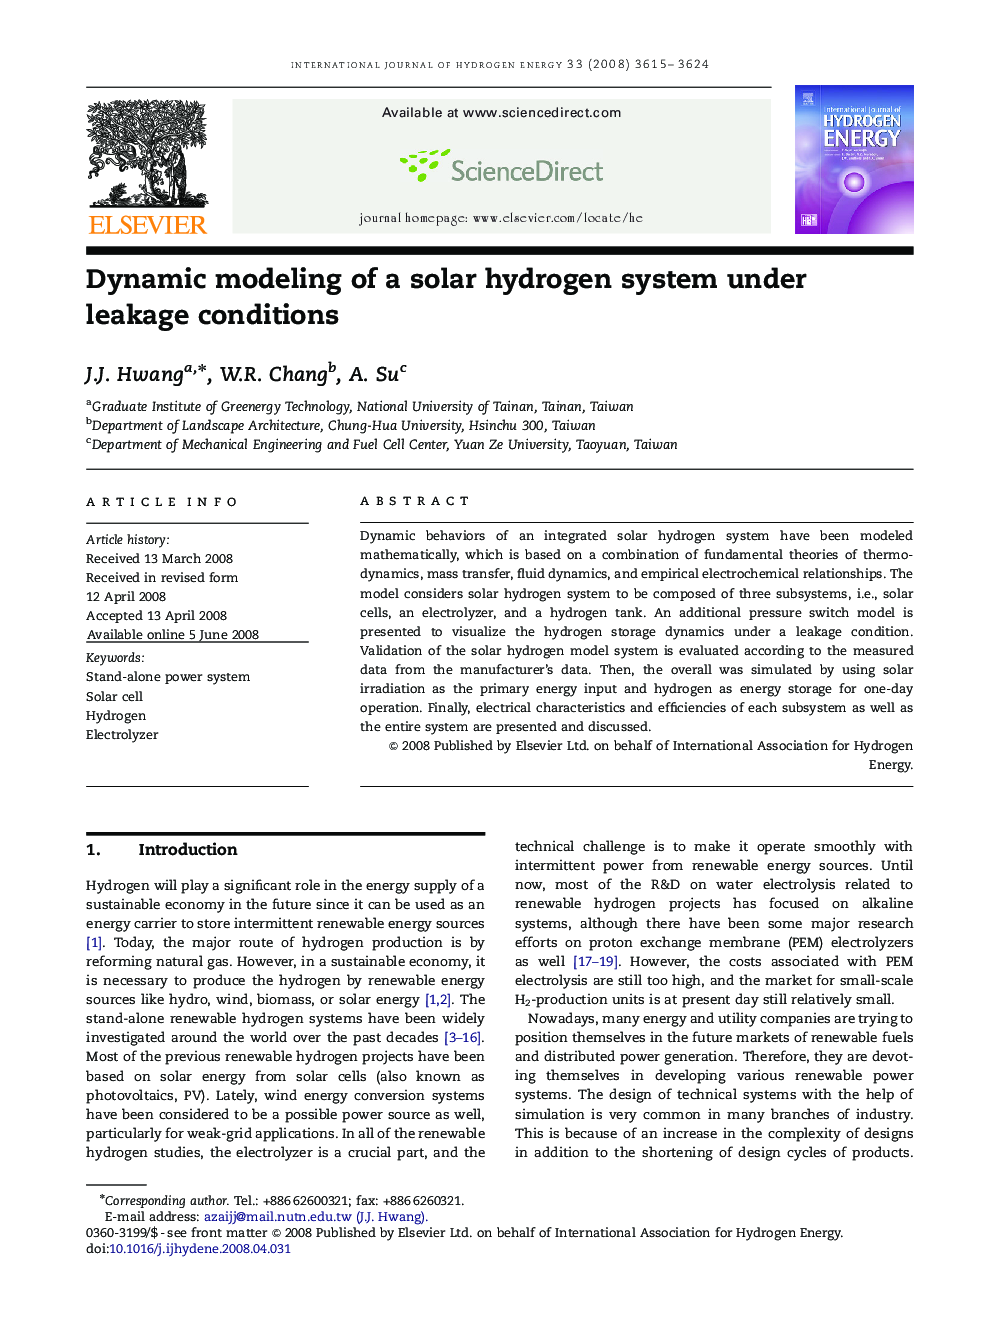 Dynamic modeling of a solar hydrogen system under leakage conditions